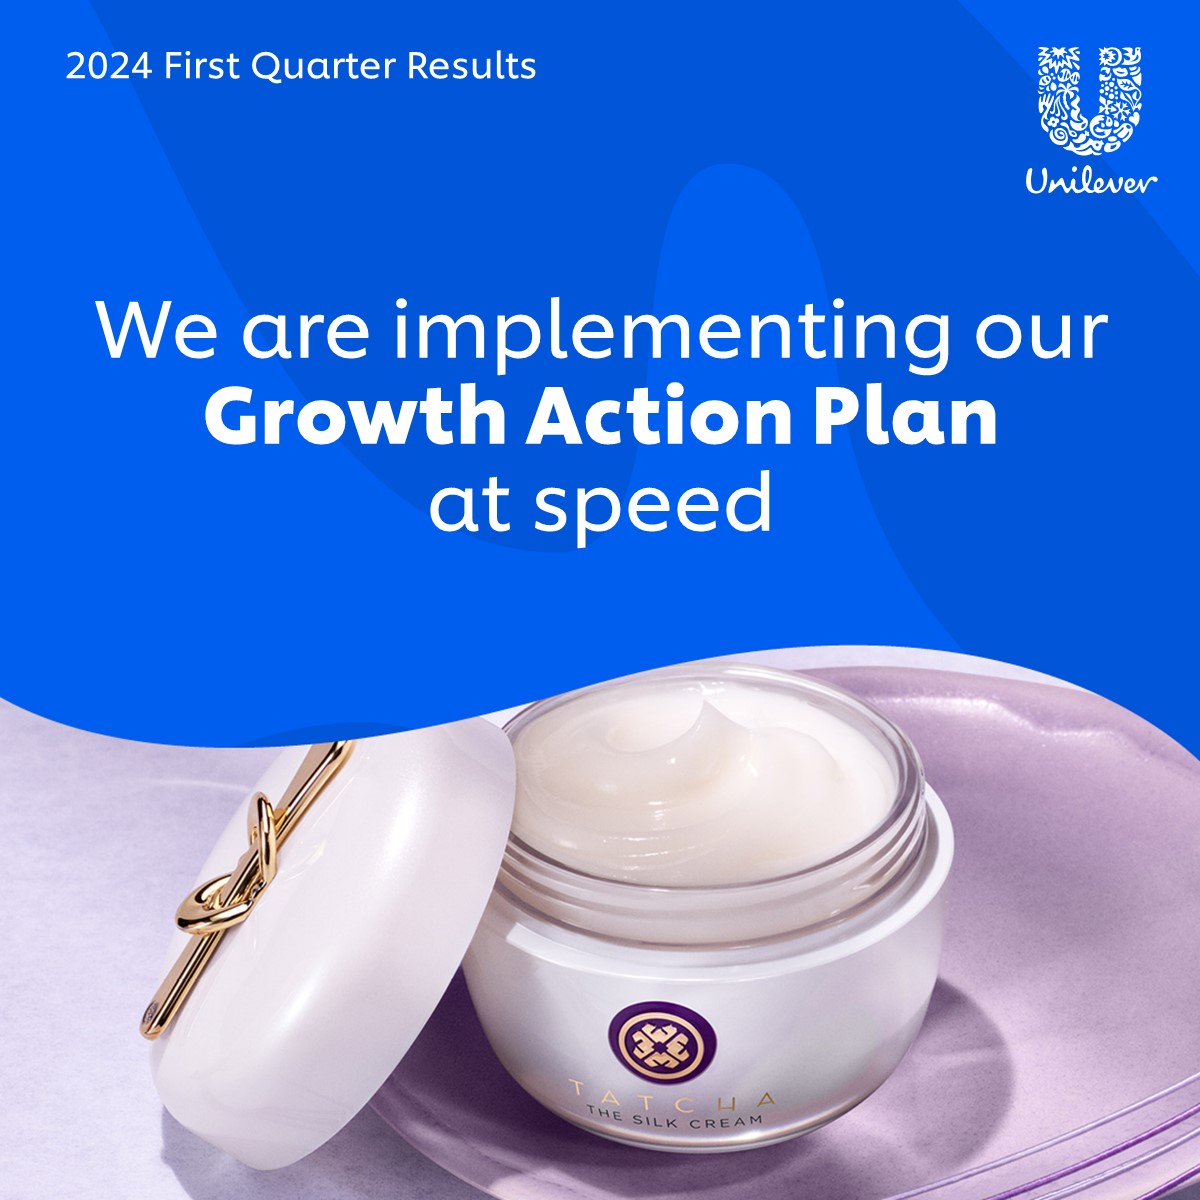 Our Growth Action Plan is focused on three clear priorities:

·Delivering higher-quality growth
·Creating a simpler and more productive business
·Embedding a strong performance focus

Read more here: 
unilever.com/investors/resu…

#UnileverResults $ULVR $UNA $UL